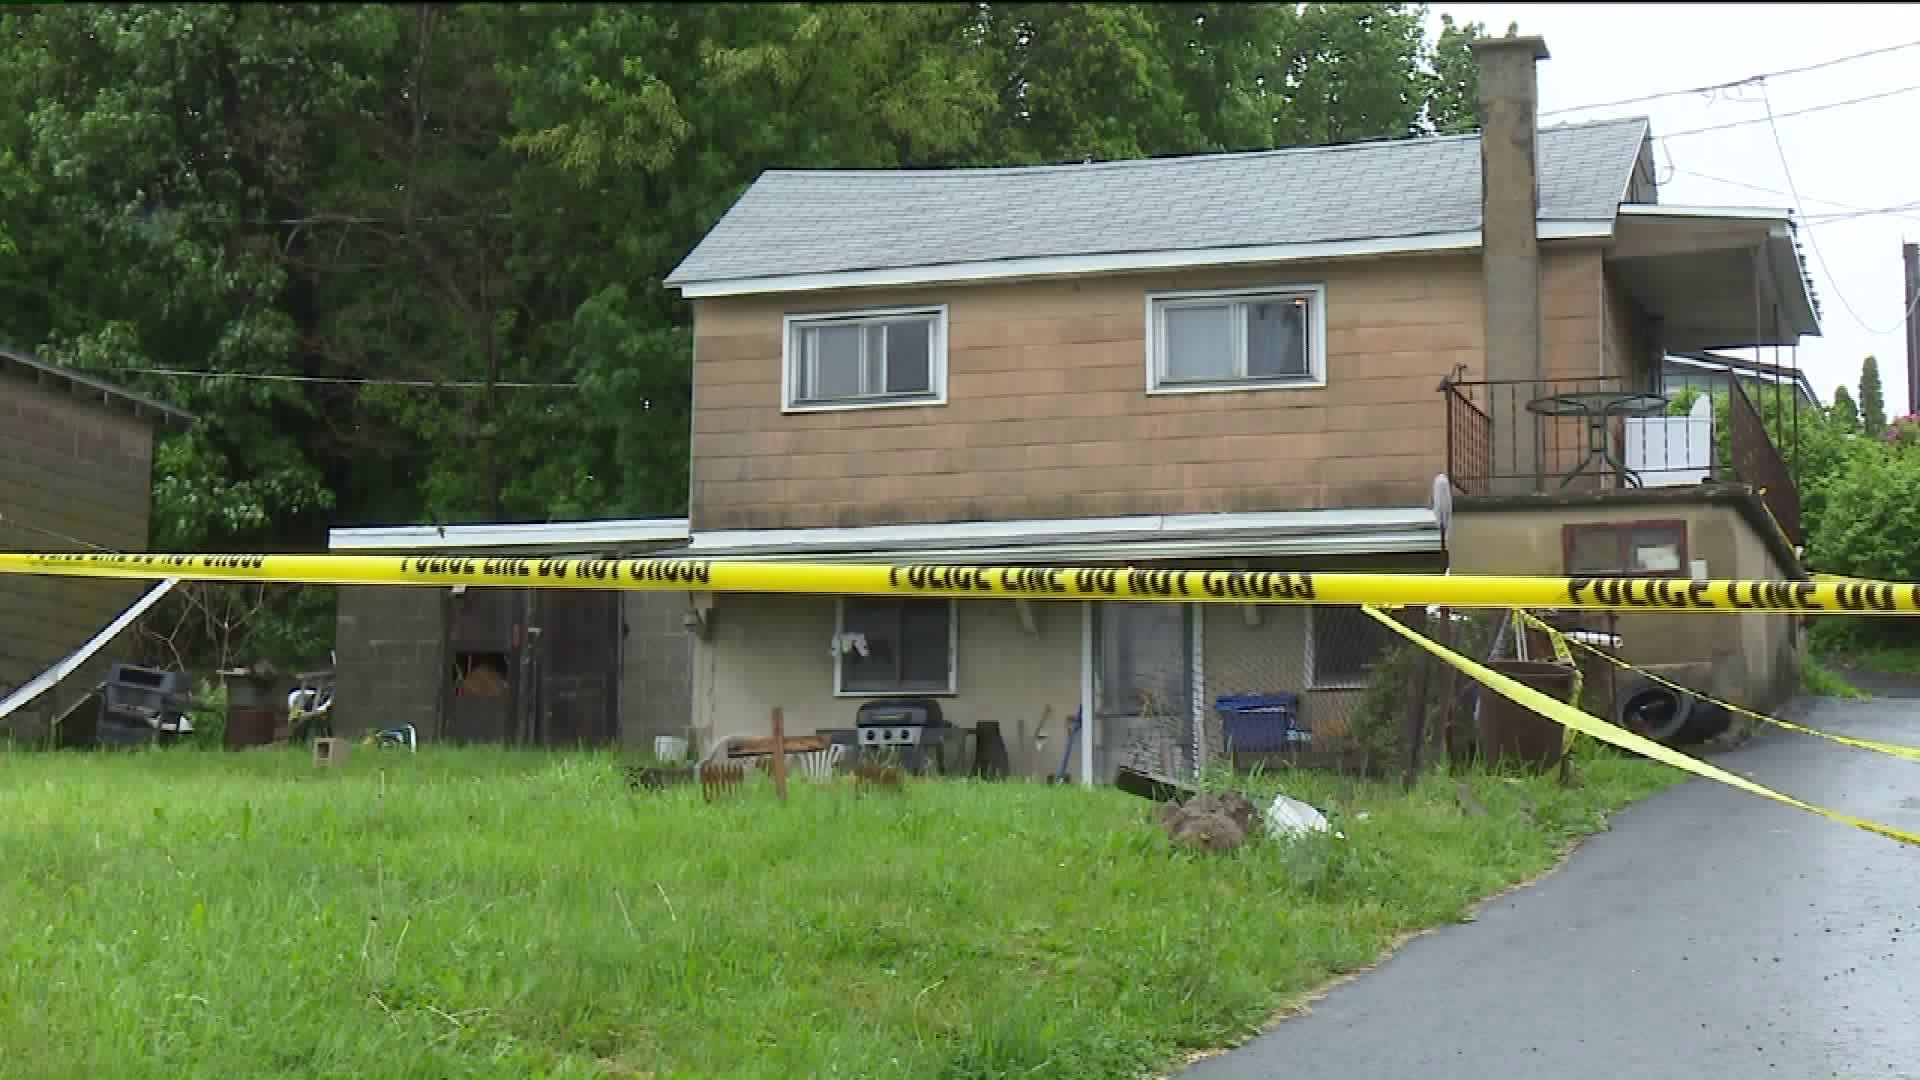 Victim Named in Homicide Case in Schuylkill County